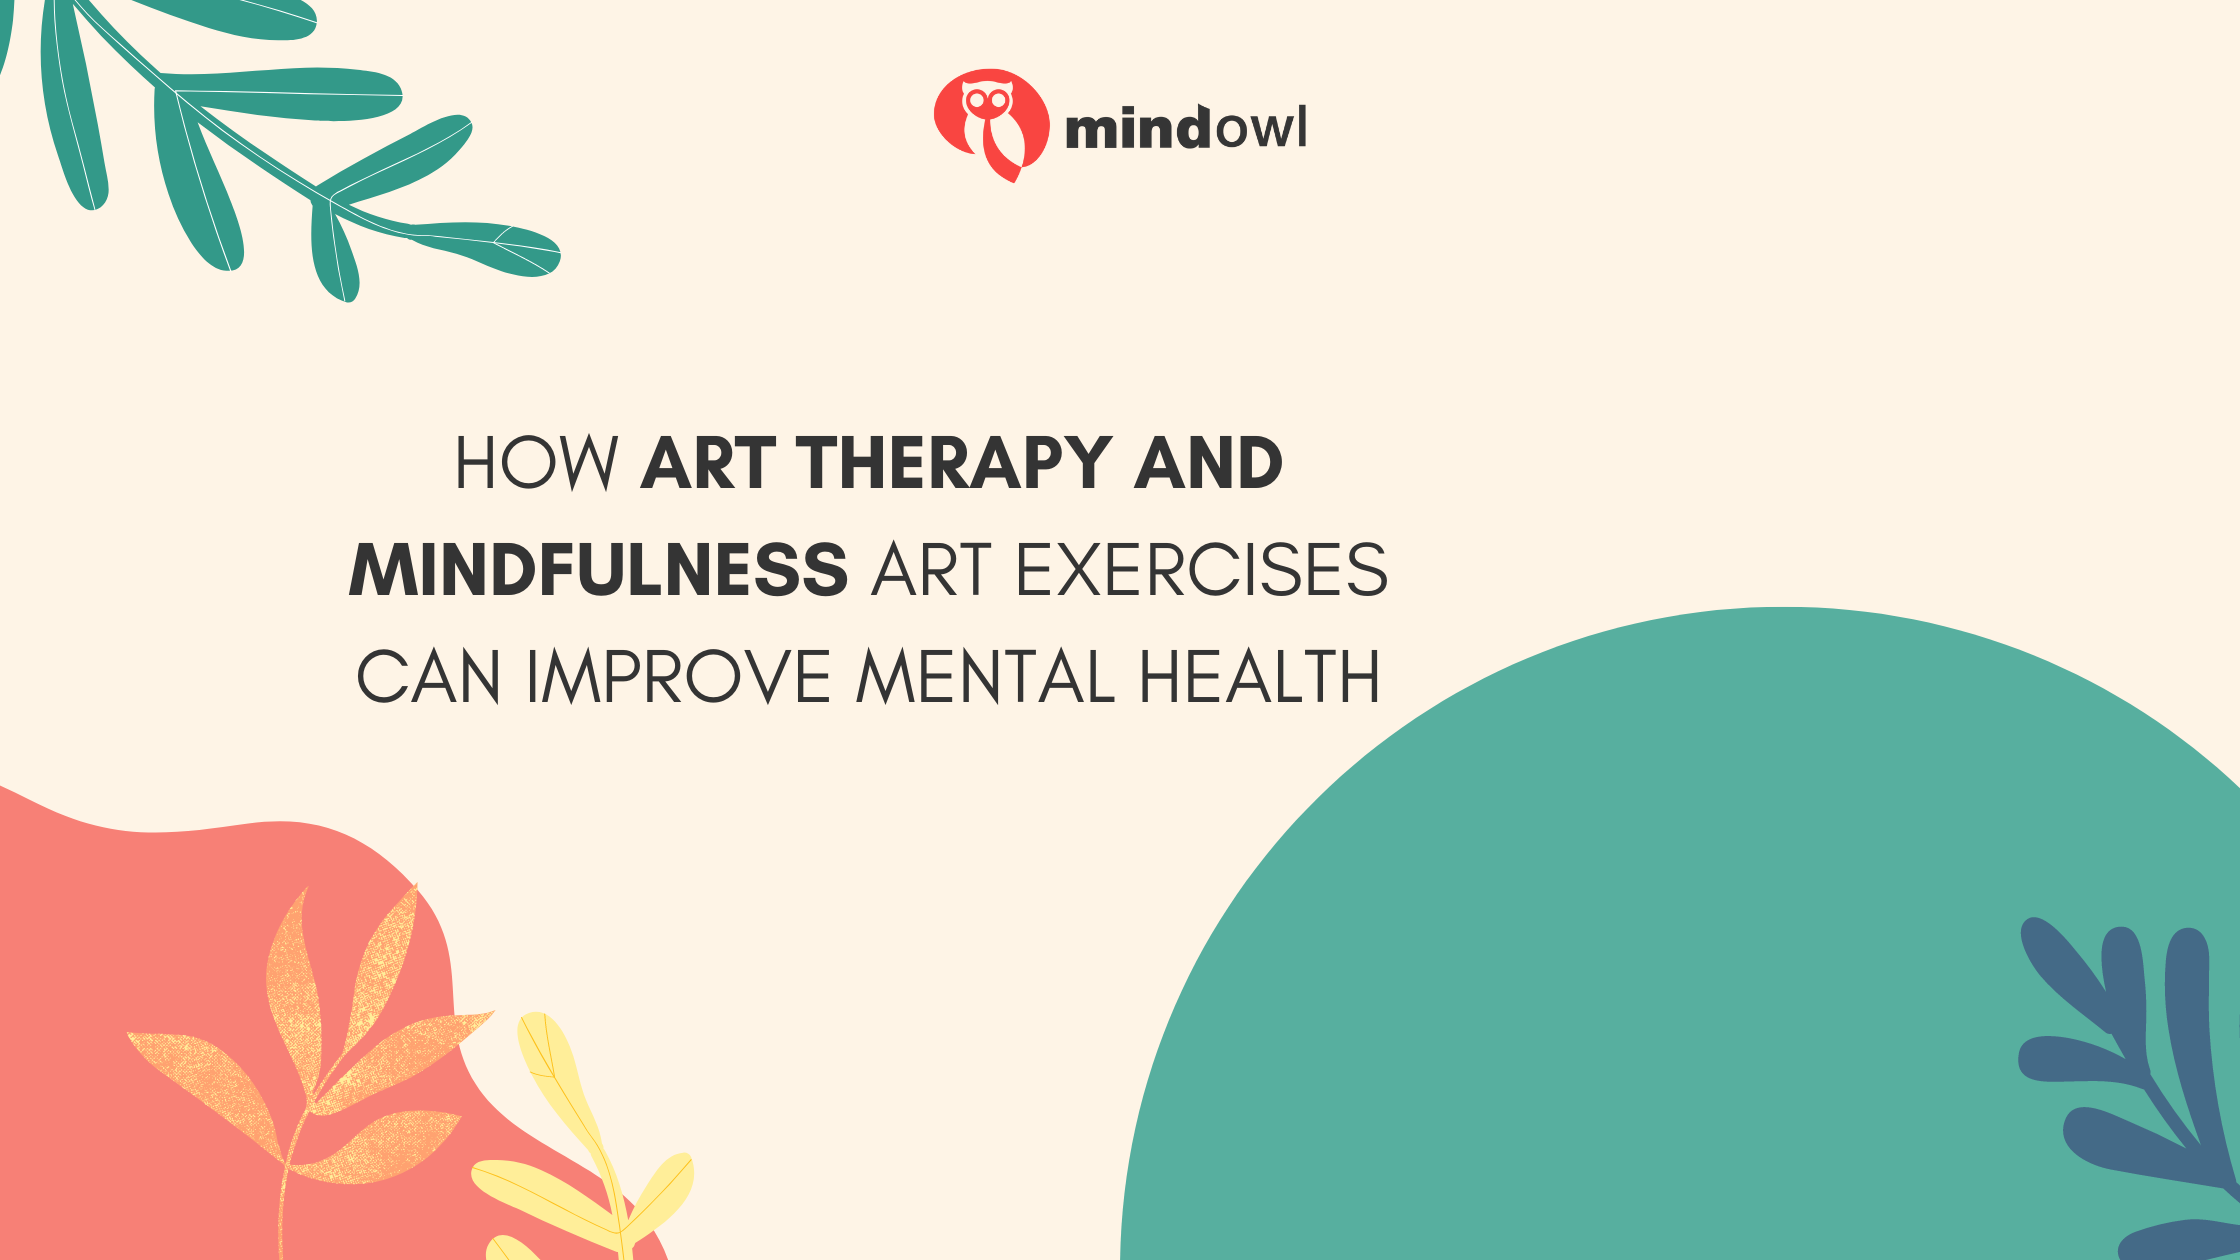 How Art Therapy And Mindfulness Art Exercises Can Improve Mental Health